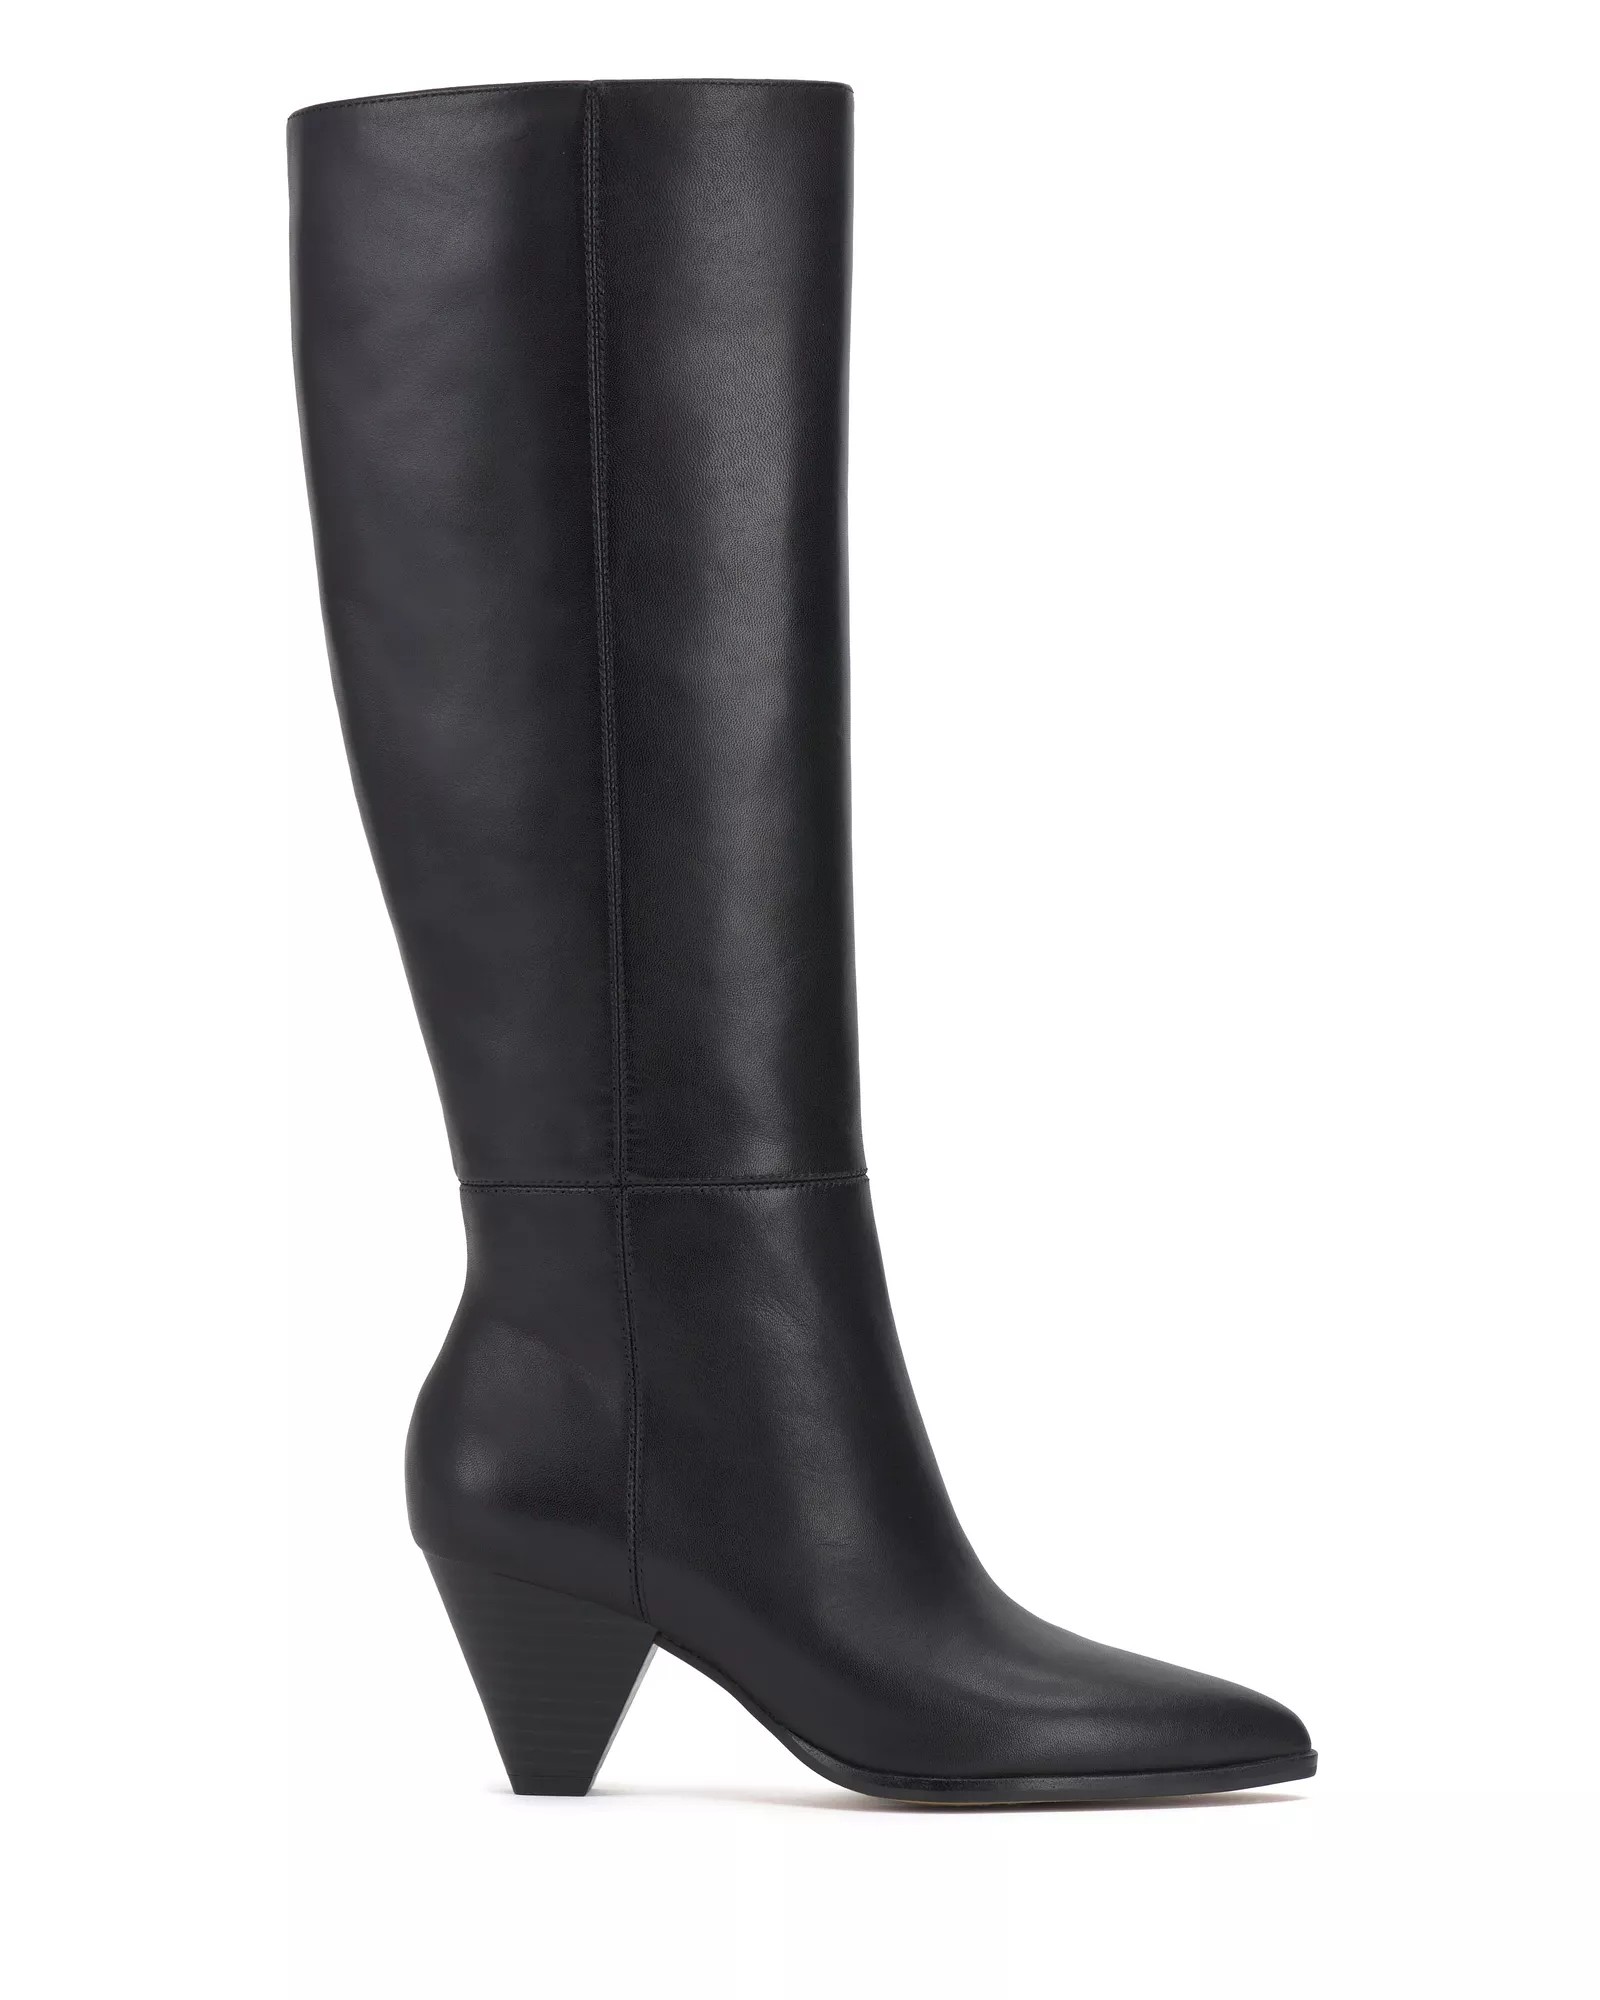 Vince Camuto Buttercup Wide-Calf Boot by Dress Up Buttercup